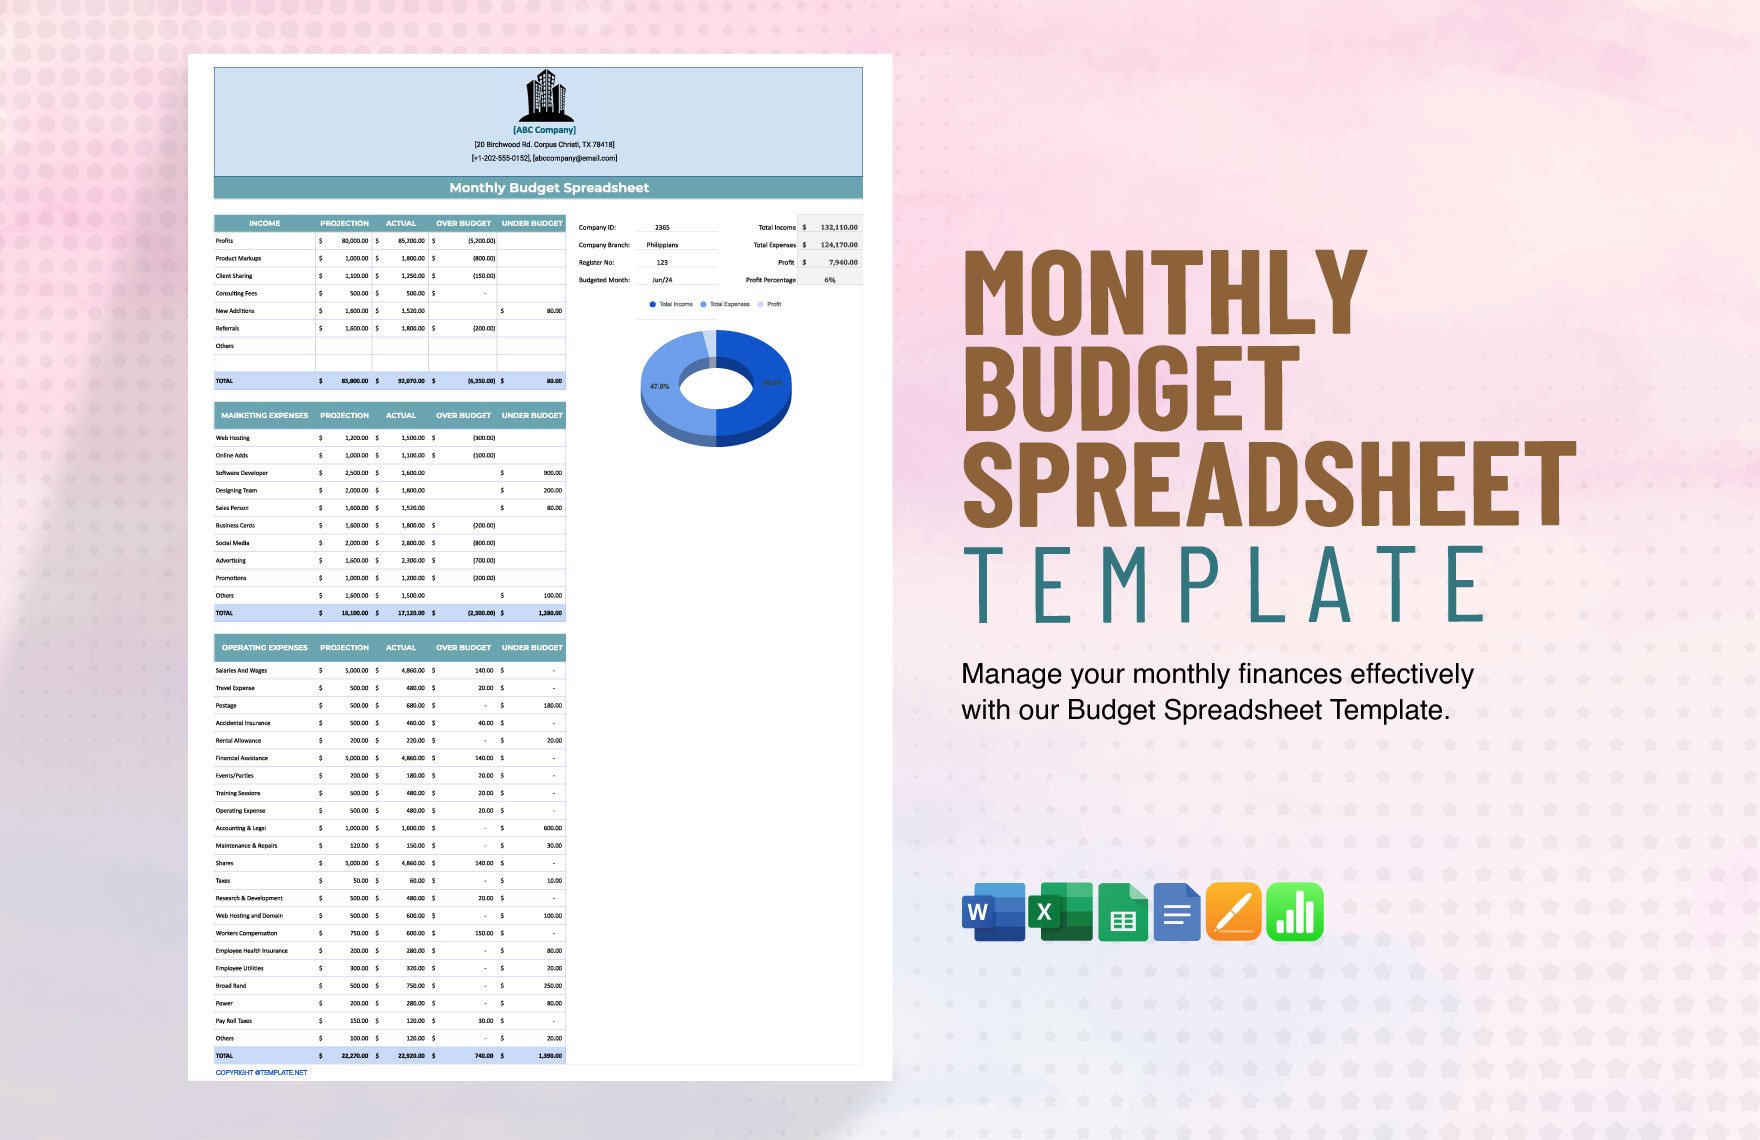 Monthly Budget Spreadsheet Template in Word, Google Docs, Excel, Google Sheets, Apple Pages, Apple Numbers